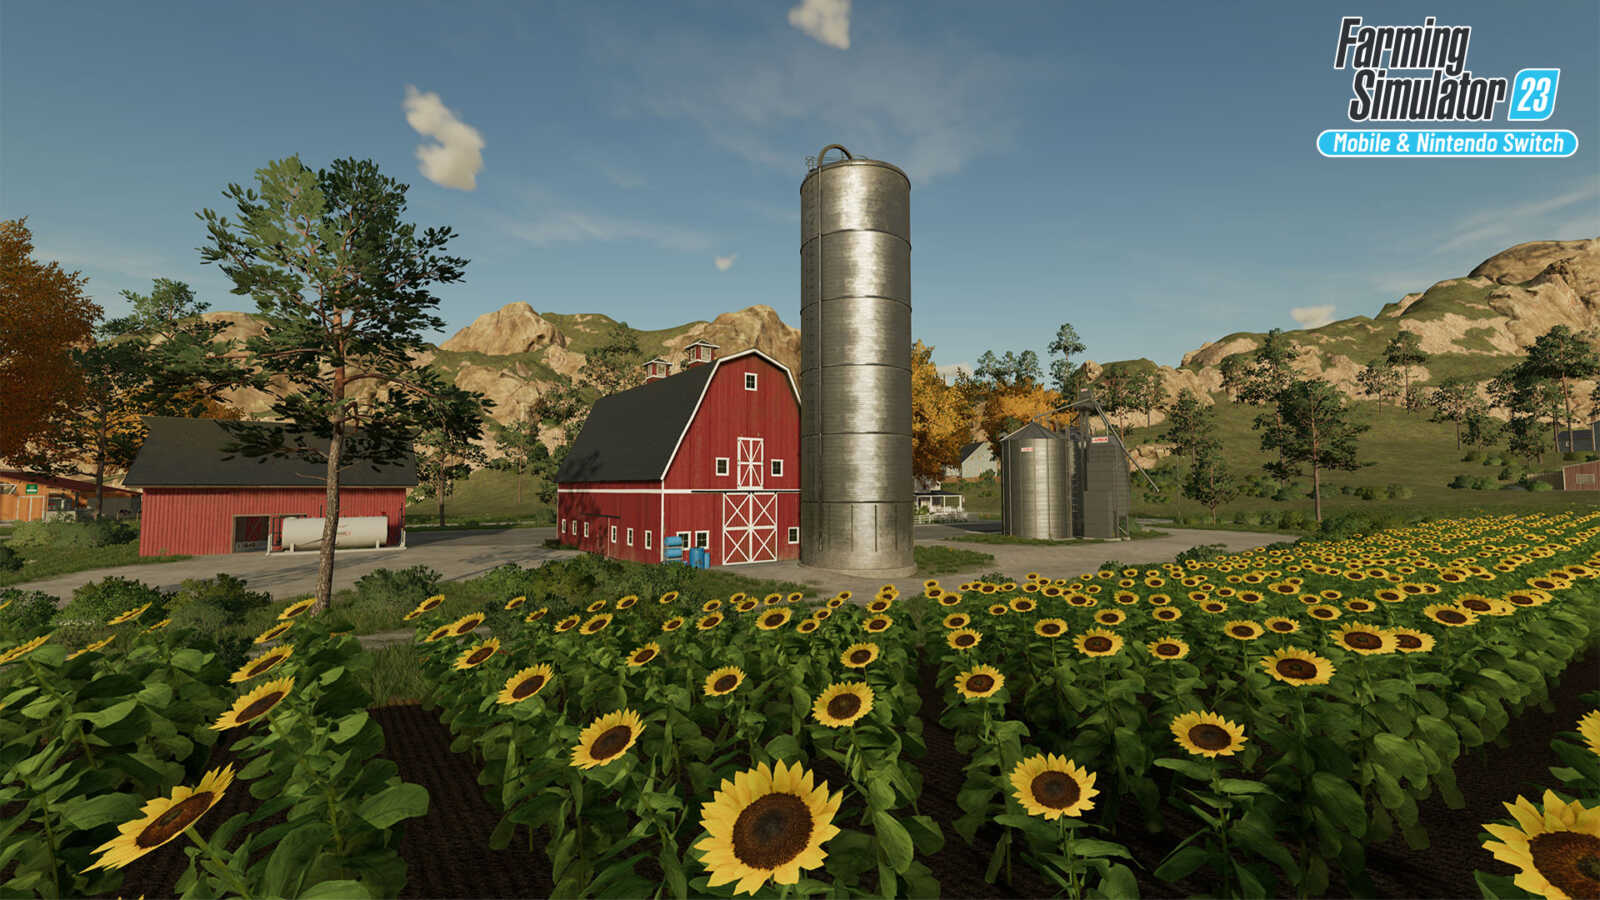 Farming Simulator 22 Review: An Authentic But Frustrating Experience